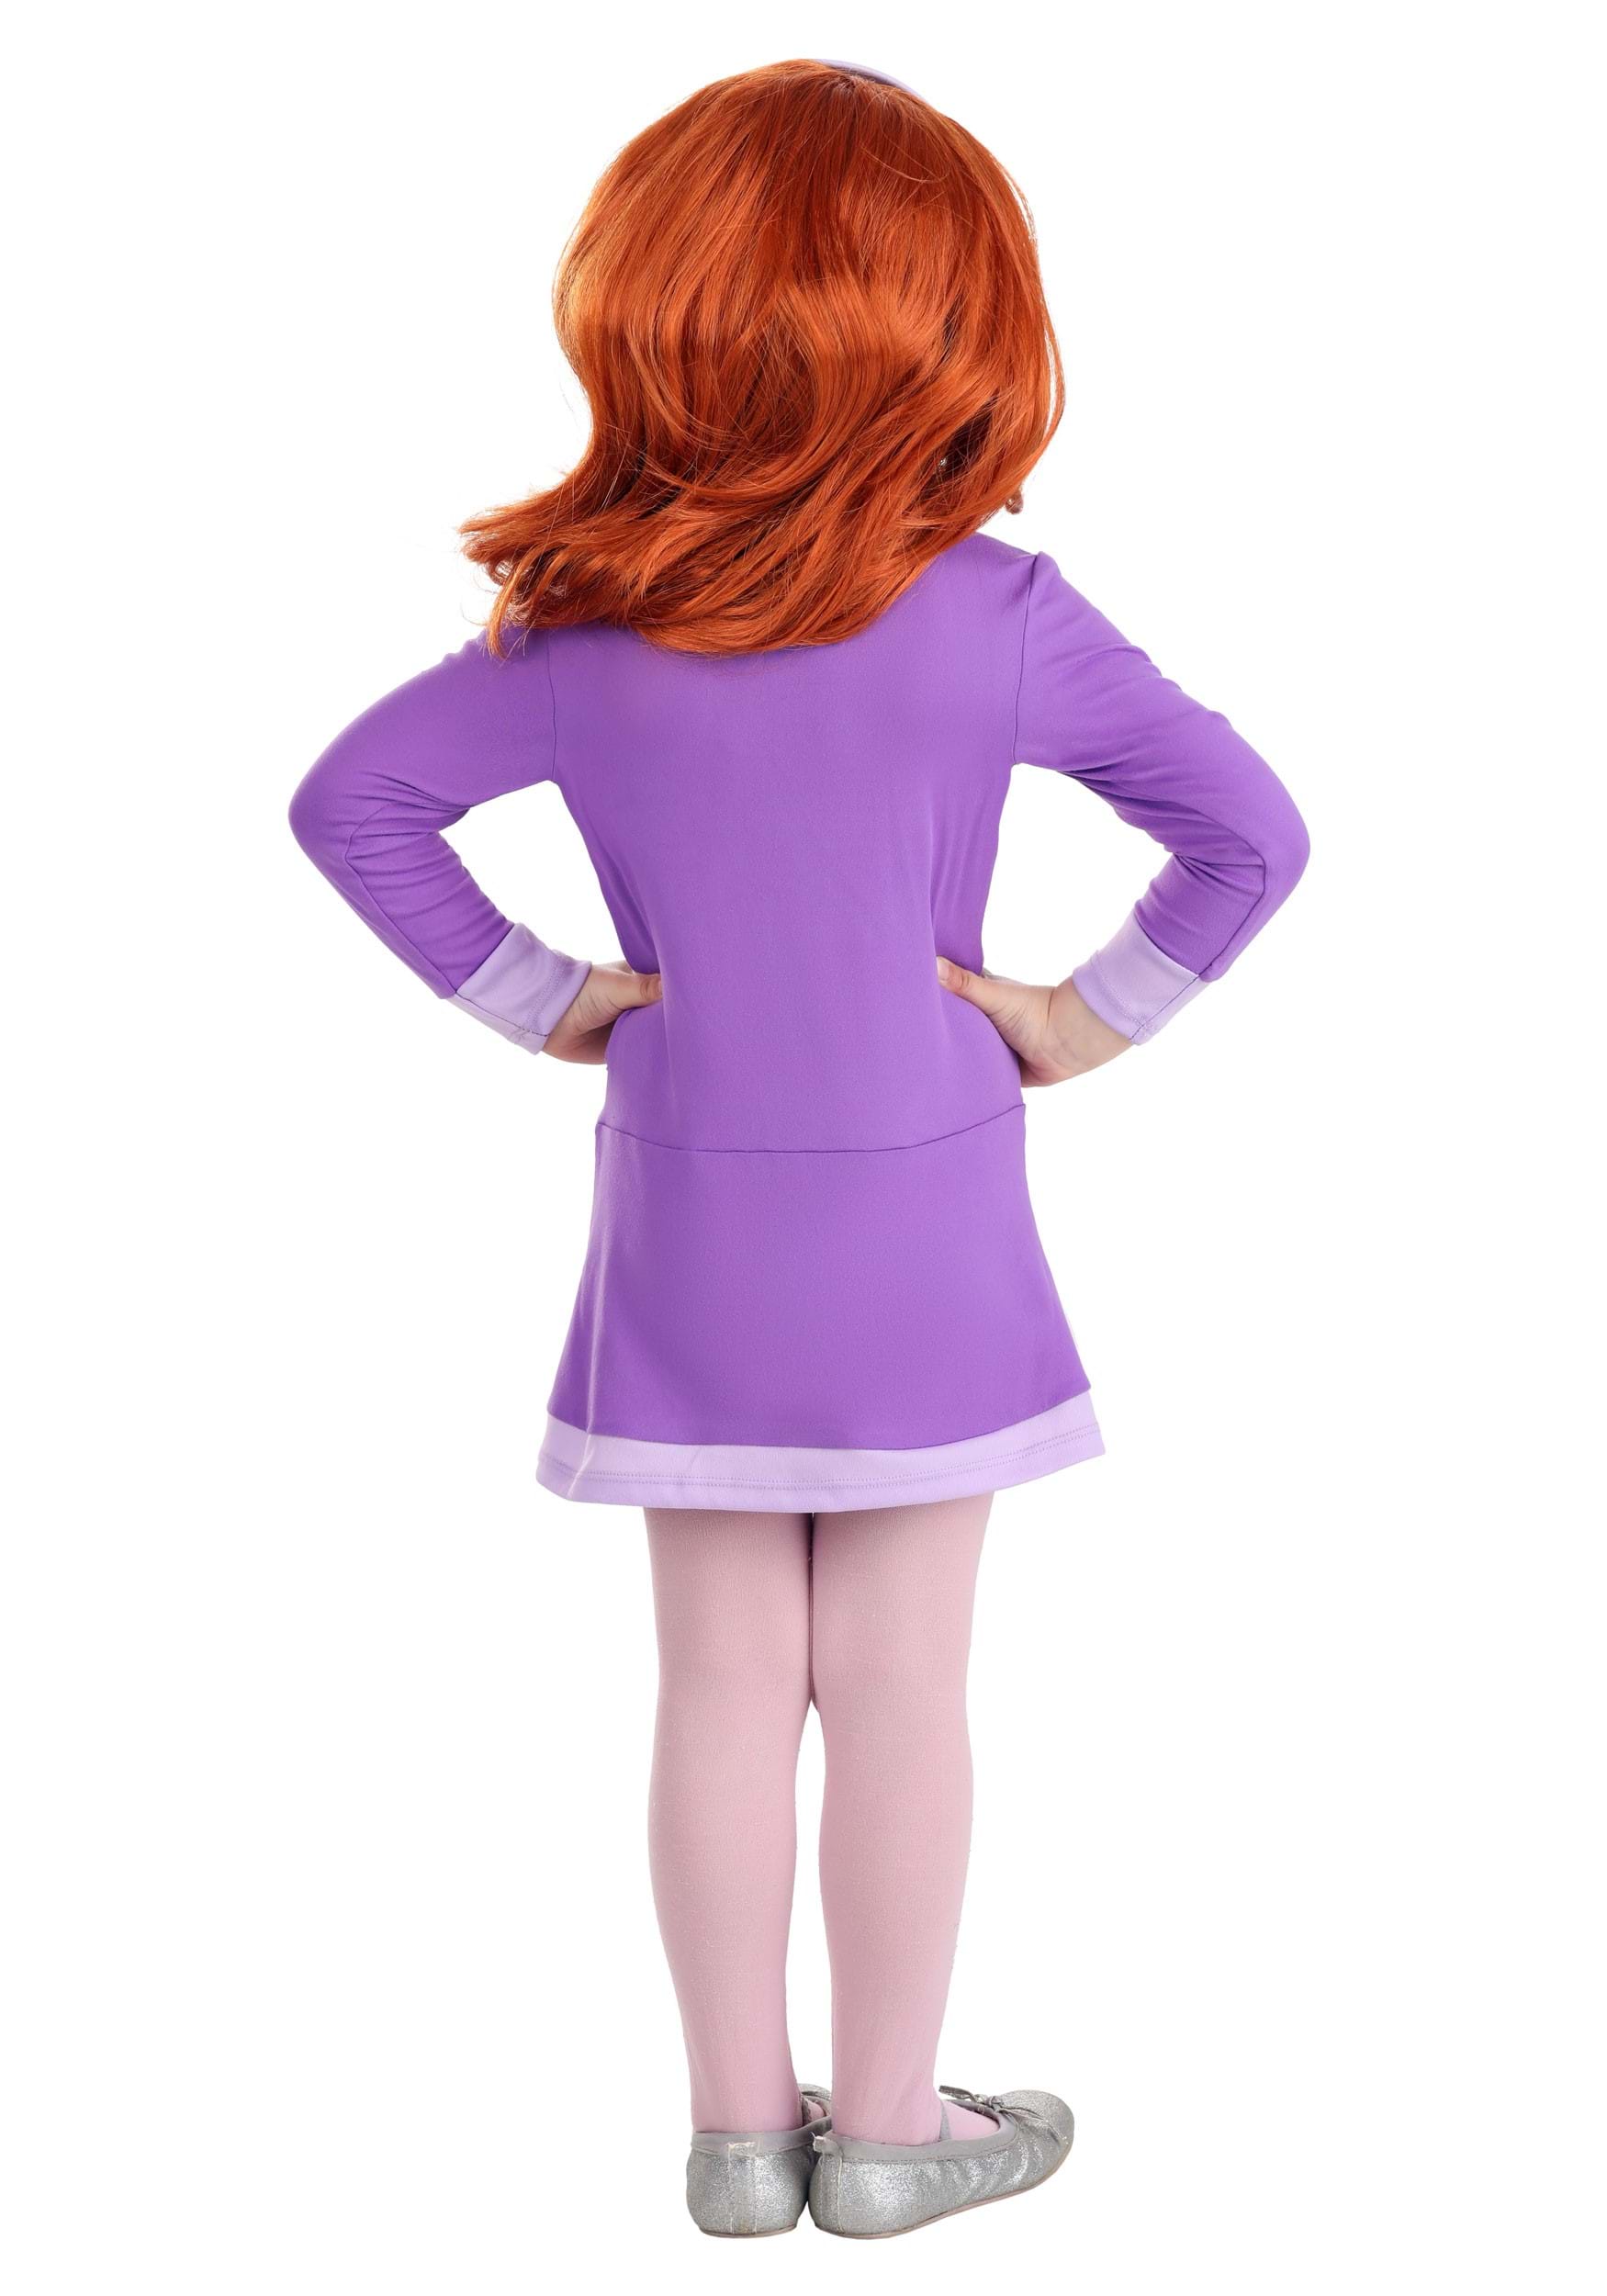 Toddler Scooby Doo Daphne Costume